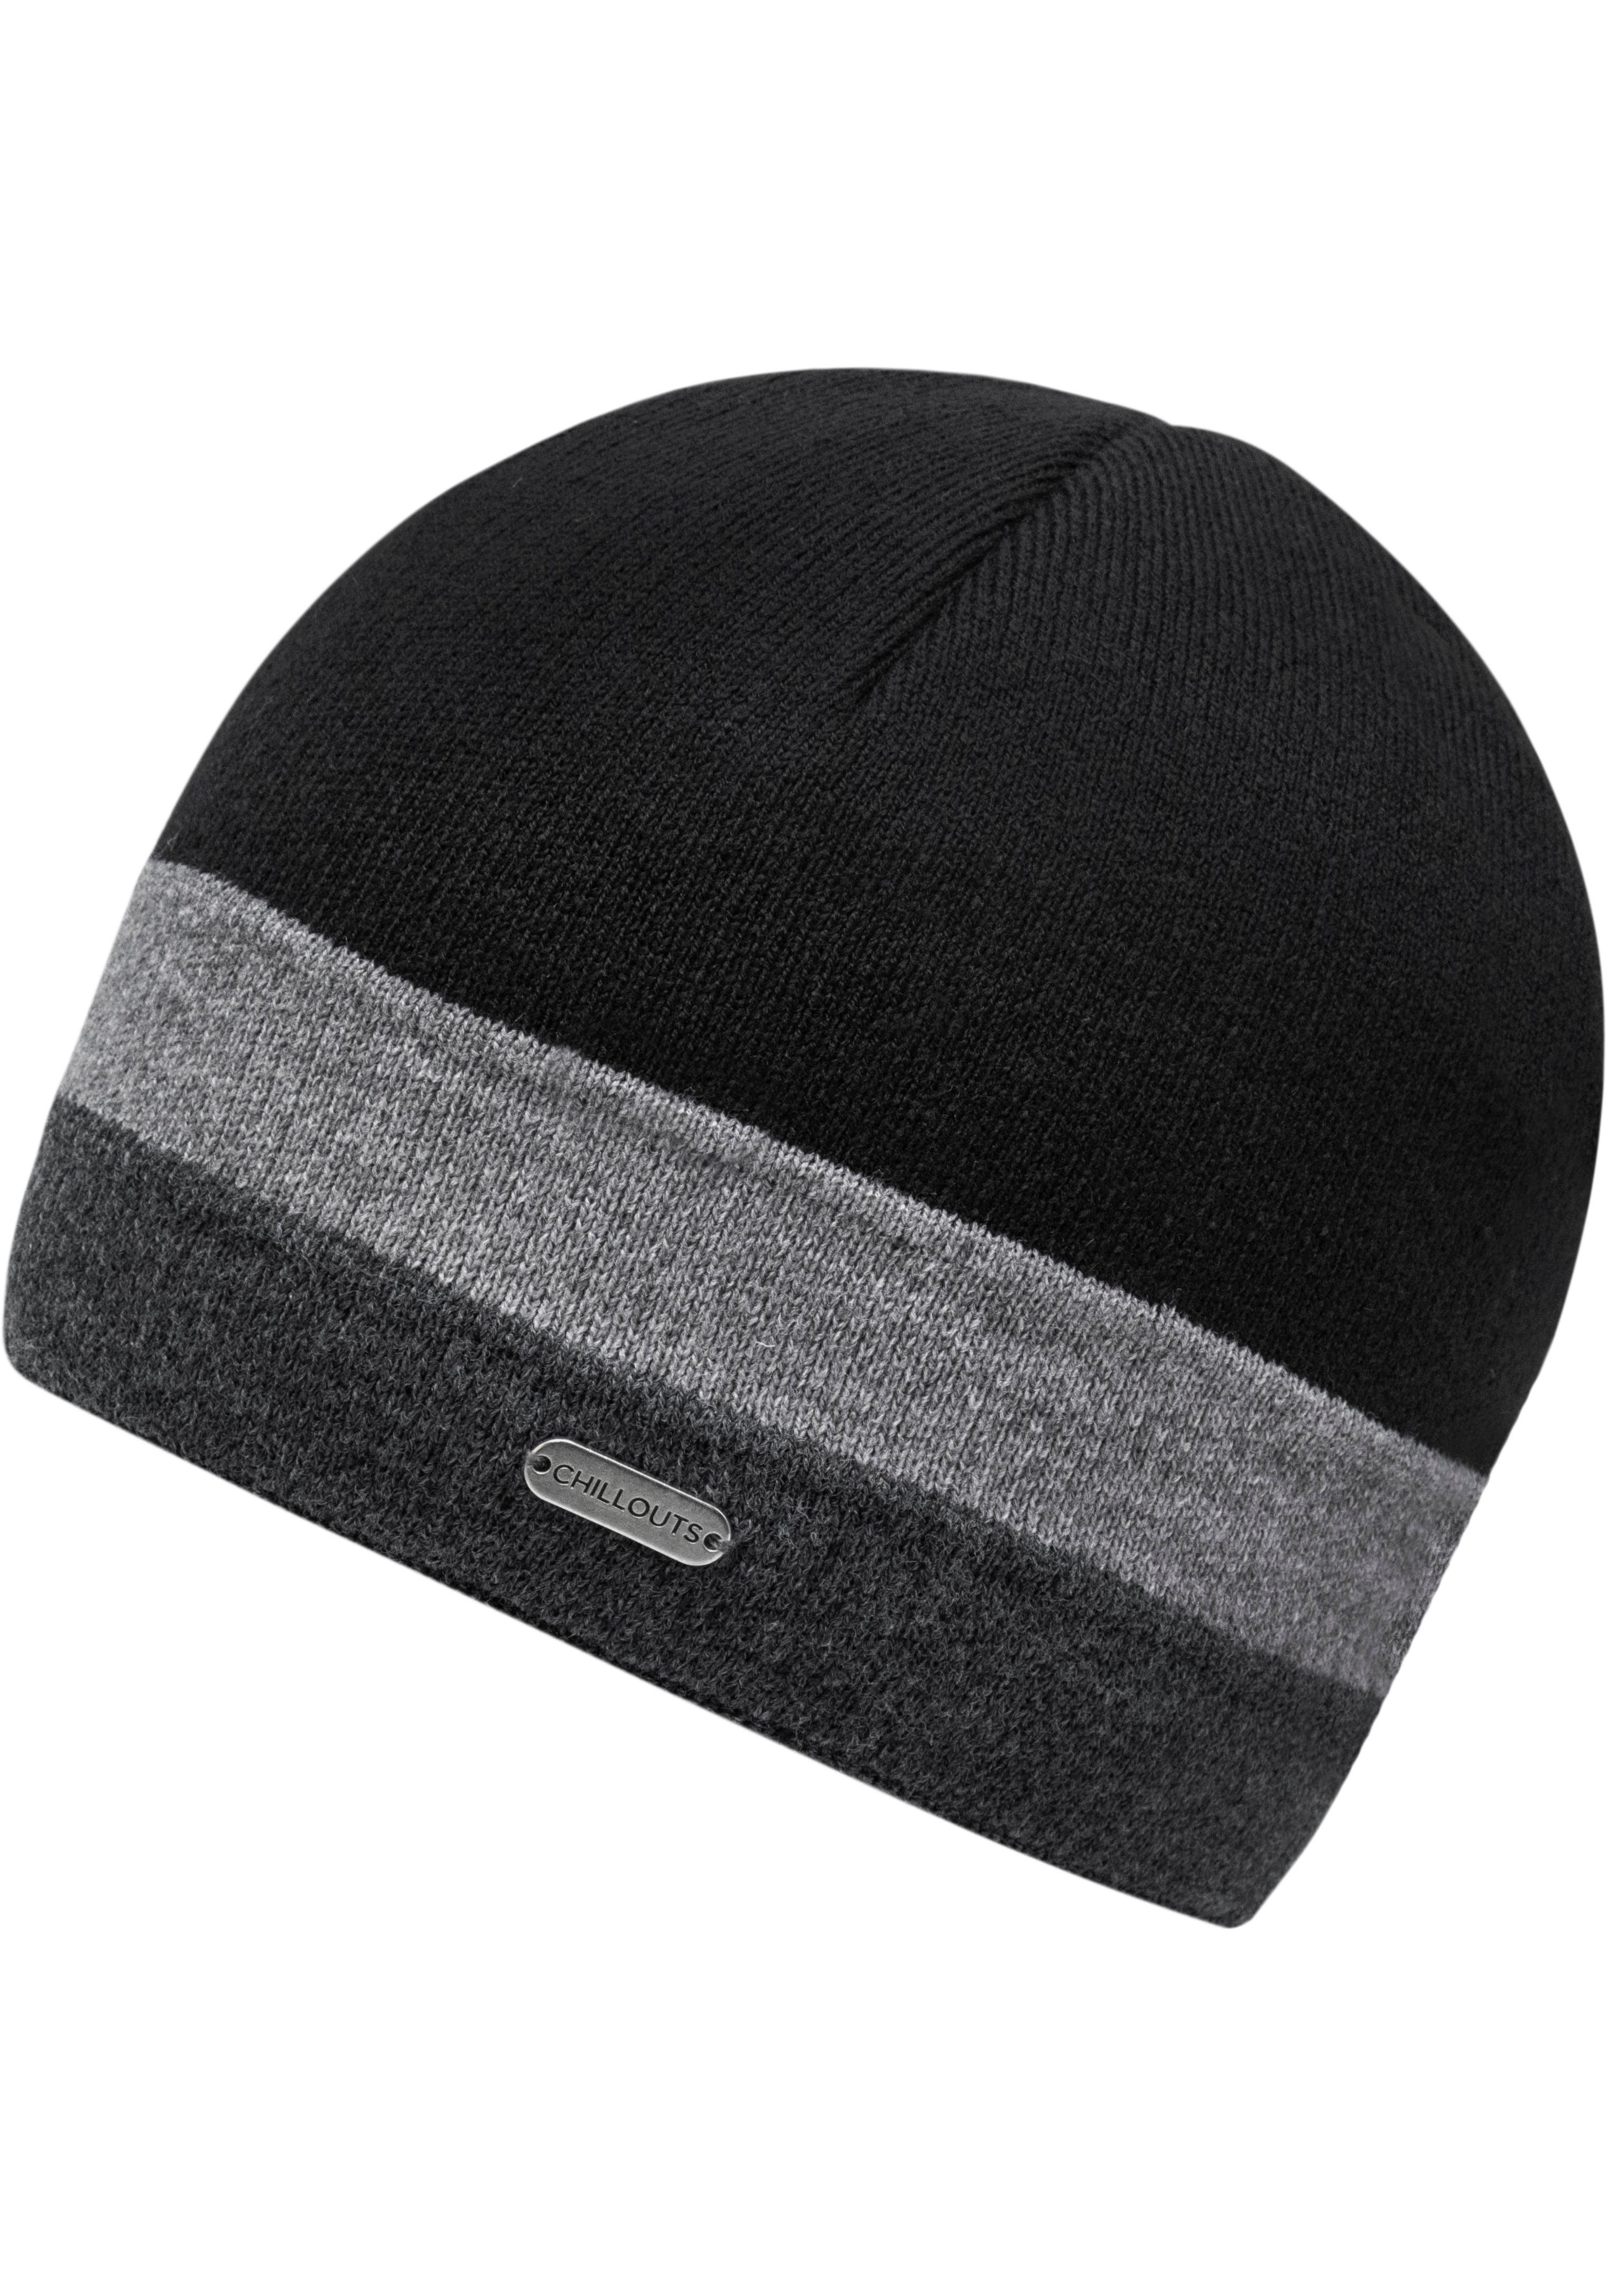 chillouts Beanie Johnny Johnny angesagtes und Accessoire Angenehmes Hat, Hat